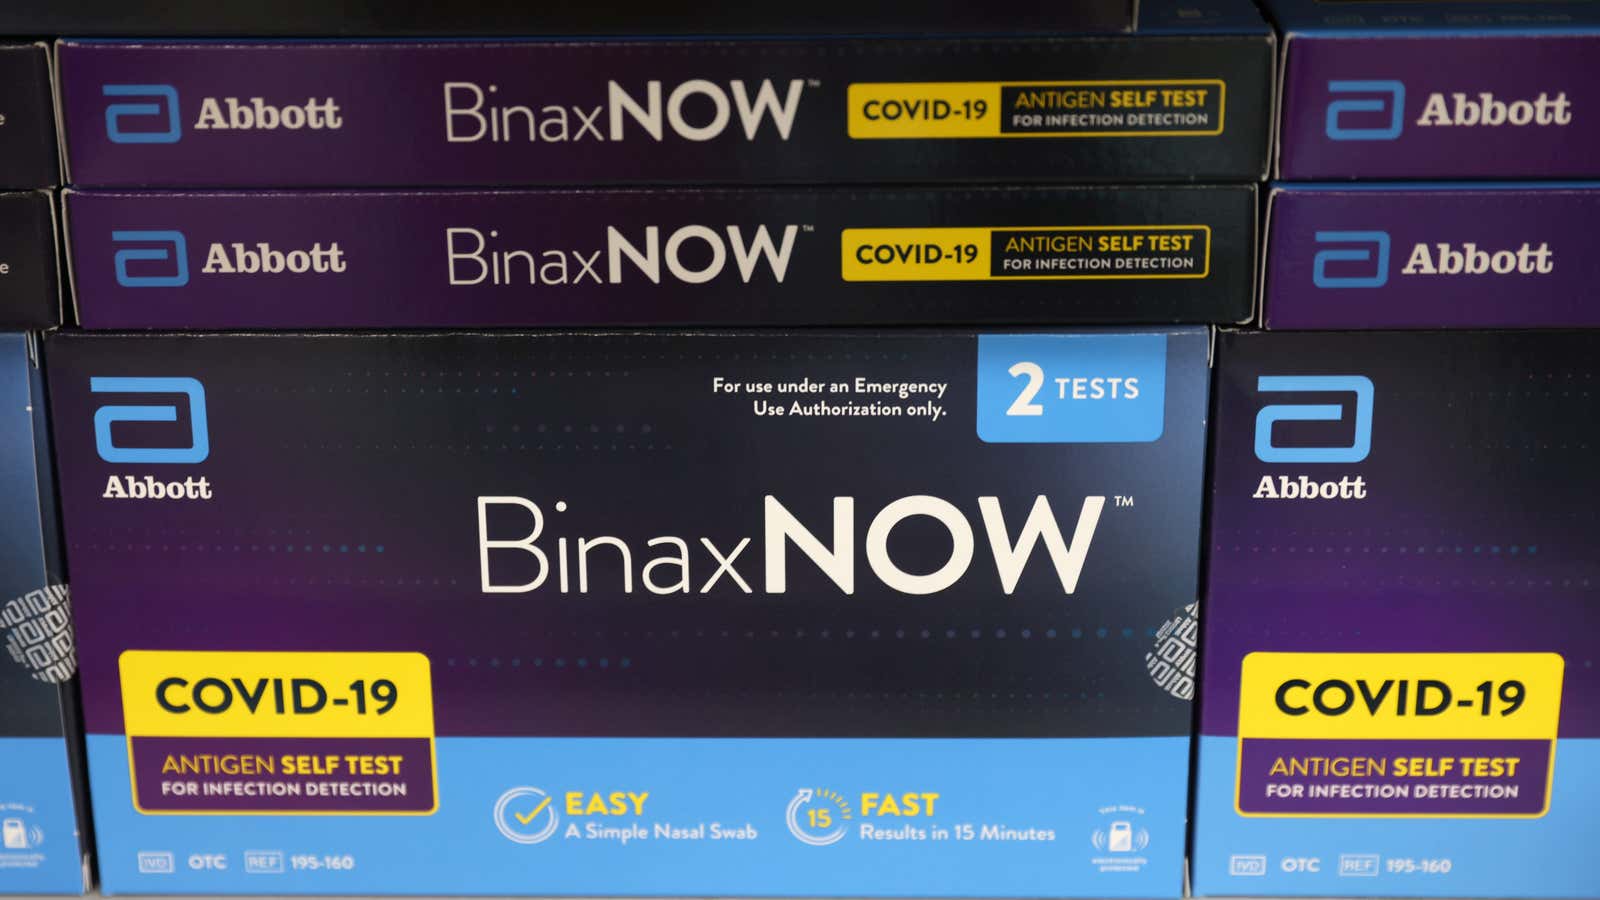 Packages of BinaxNOW COVID-19 Antigen Self Test, manufactured by Abbott Laboratories, are seen in on a store shelf.